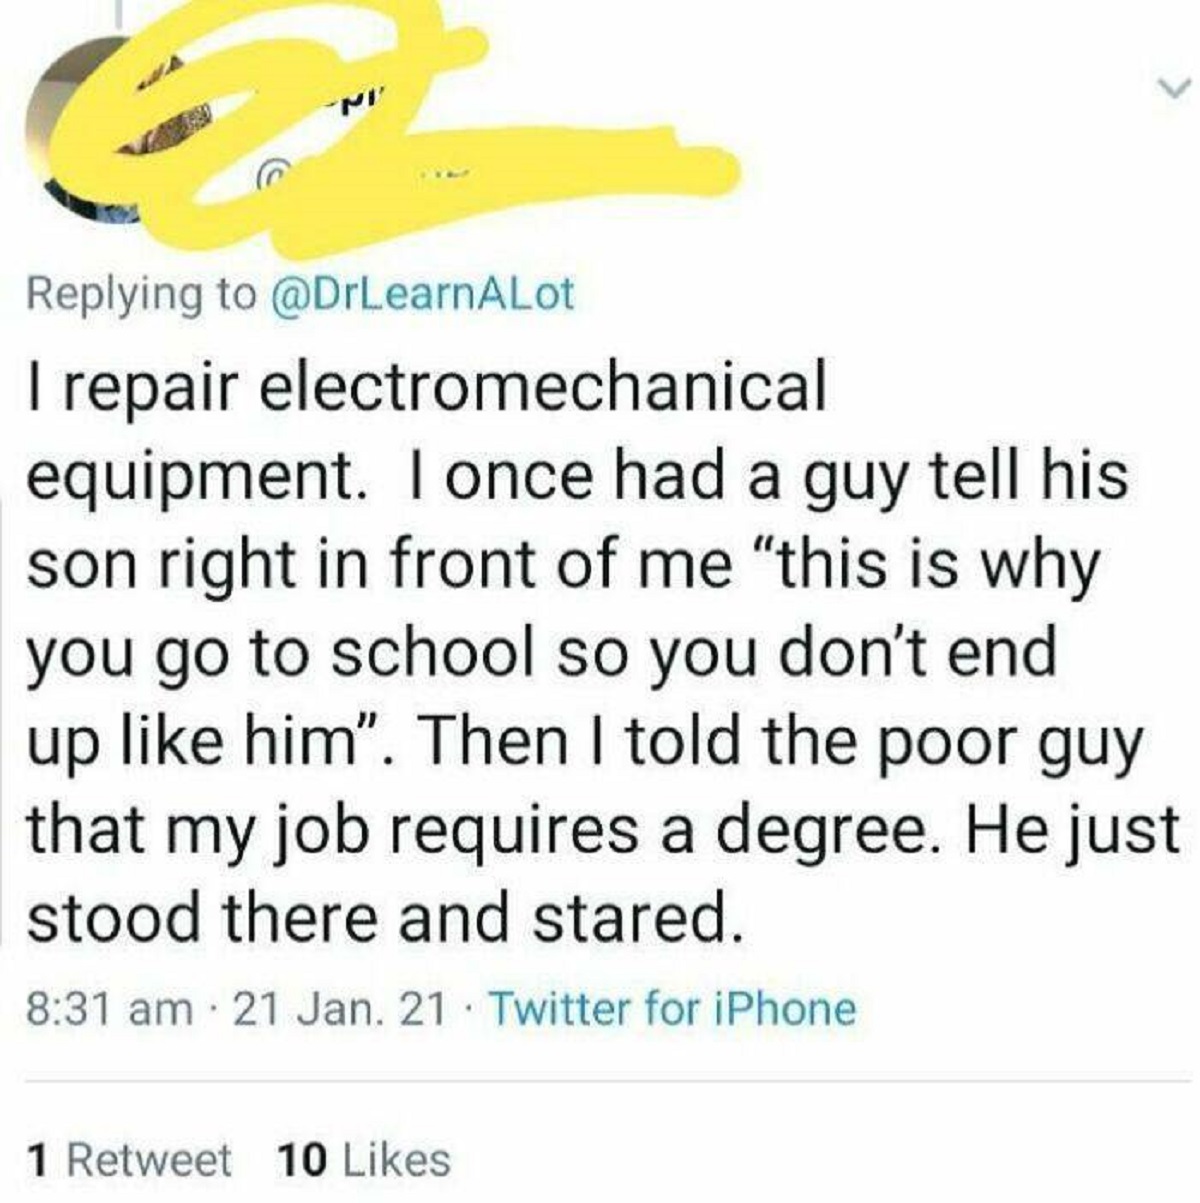 screenshot - I repair electromechanical equipment. I once had a guy tell his son right in front of me "this is why you go to school so you don't end up him". Then I told the poor guy that my job requires a degree. He just stood there and stared. 21 Jan. 2